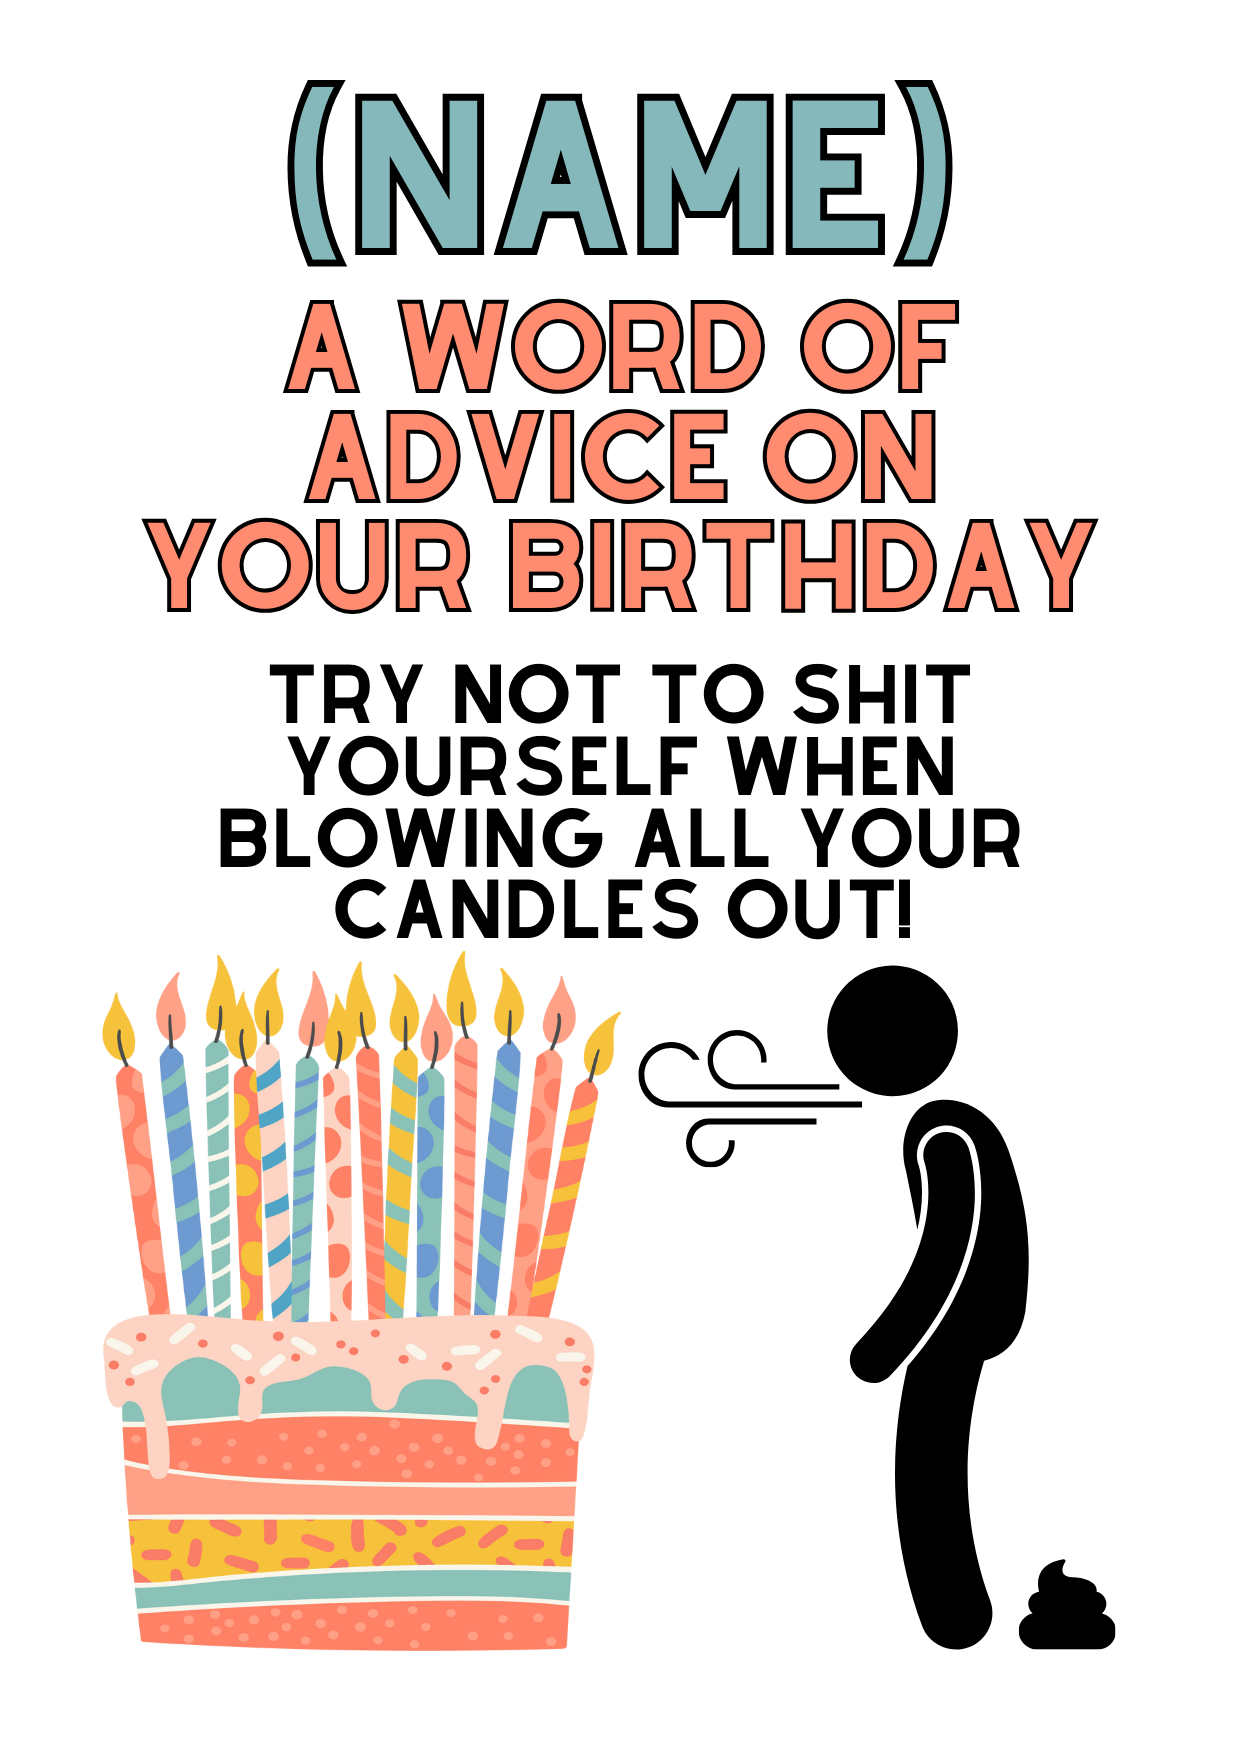 A Word of Advice on Your Birthday